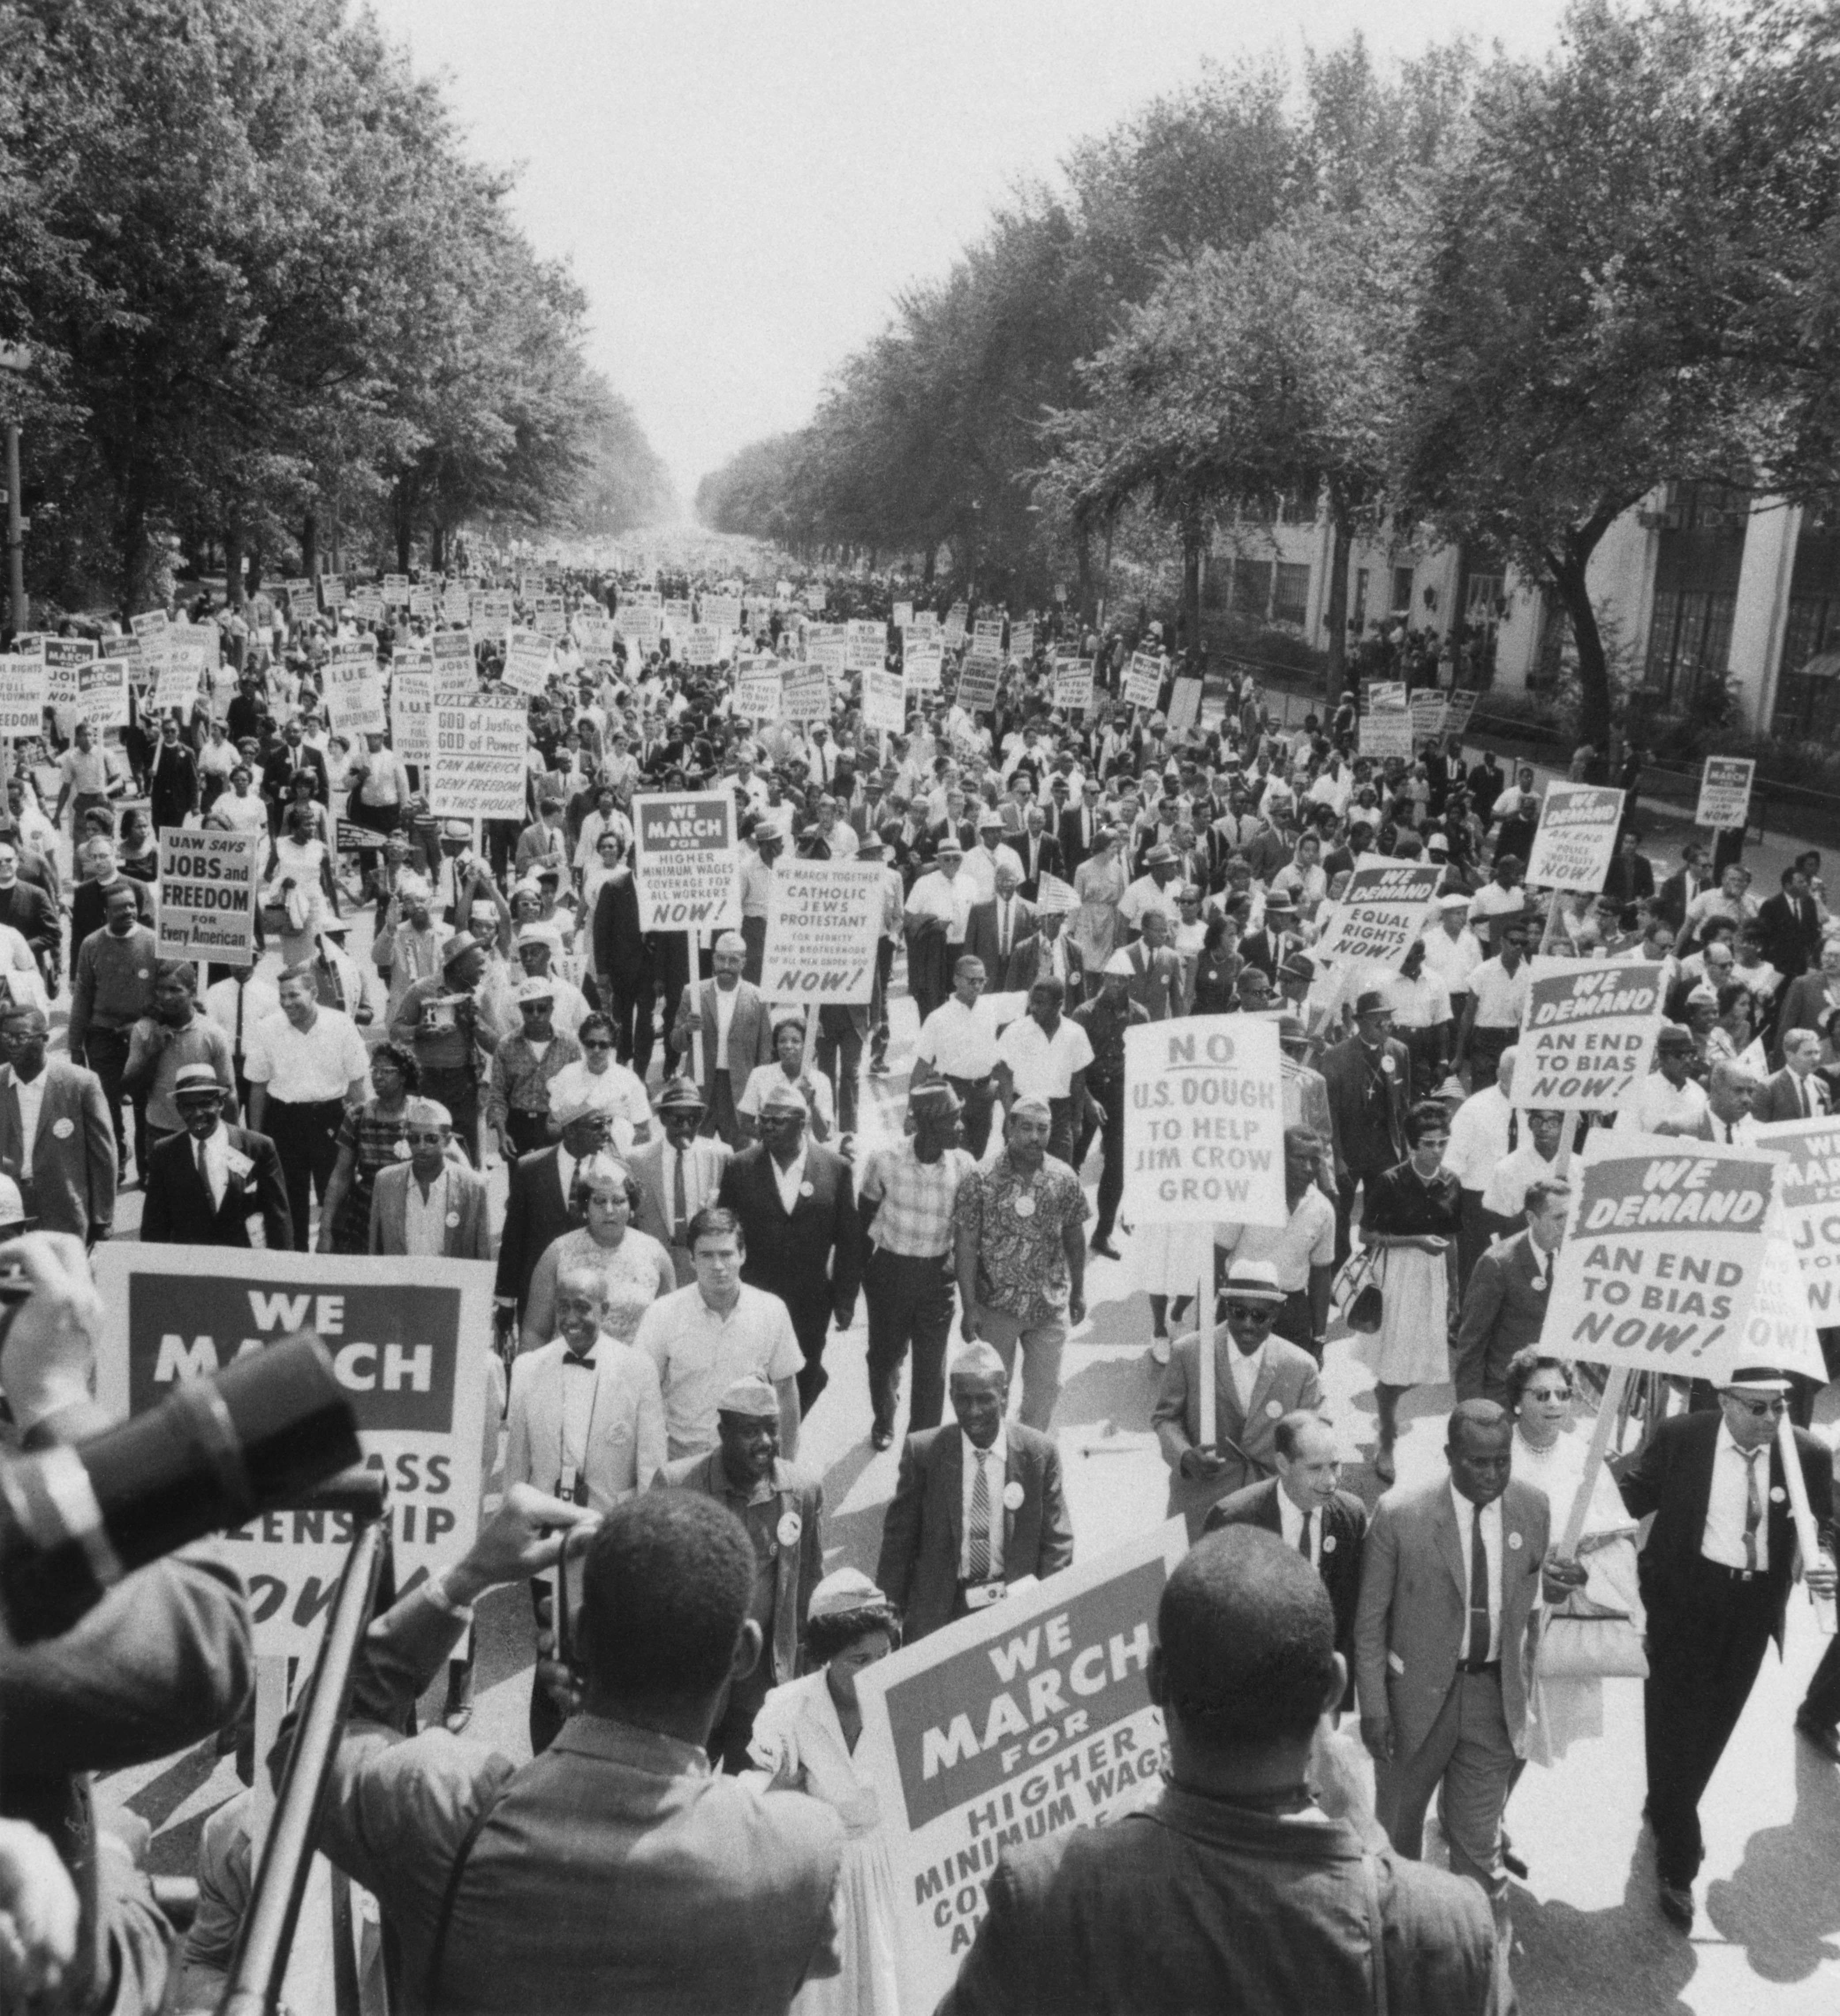 What can the Civil Rights Movement and President Johnson's "Great Society" teach us about legislative action today?